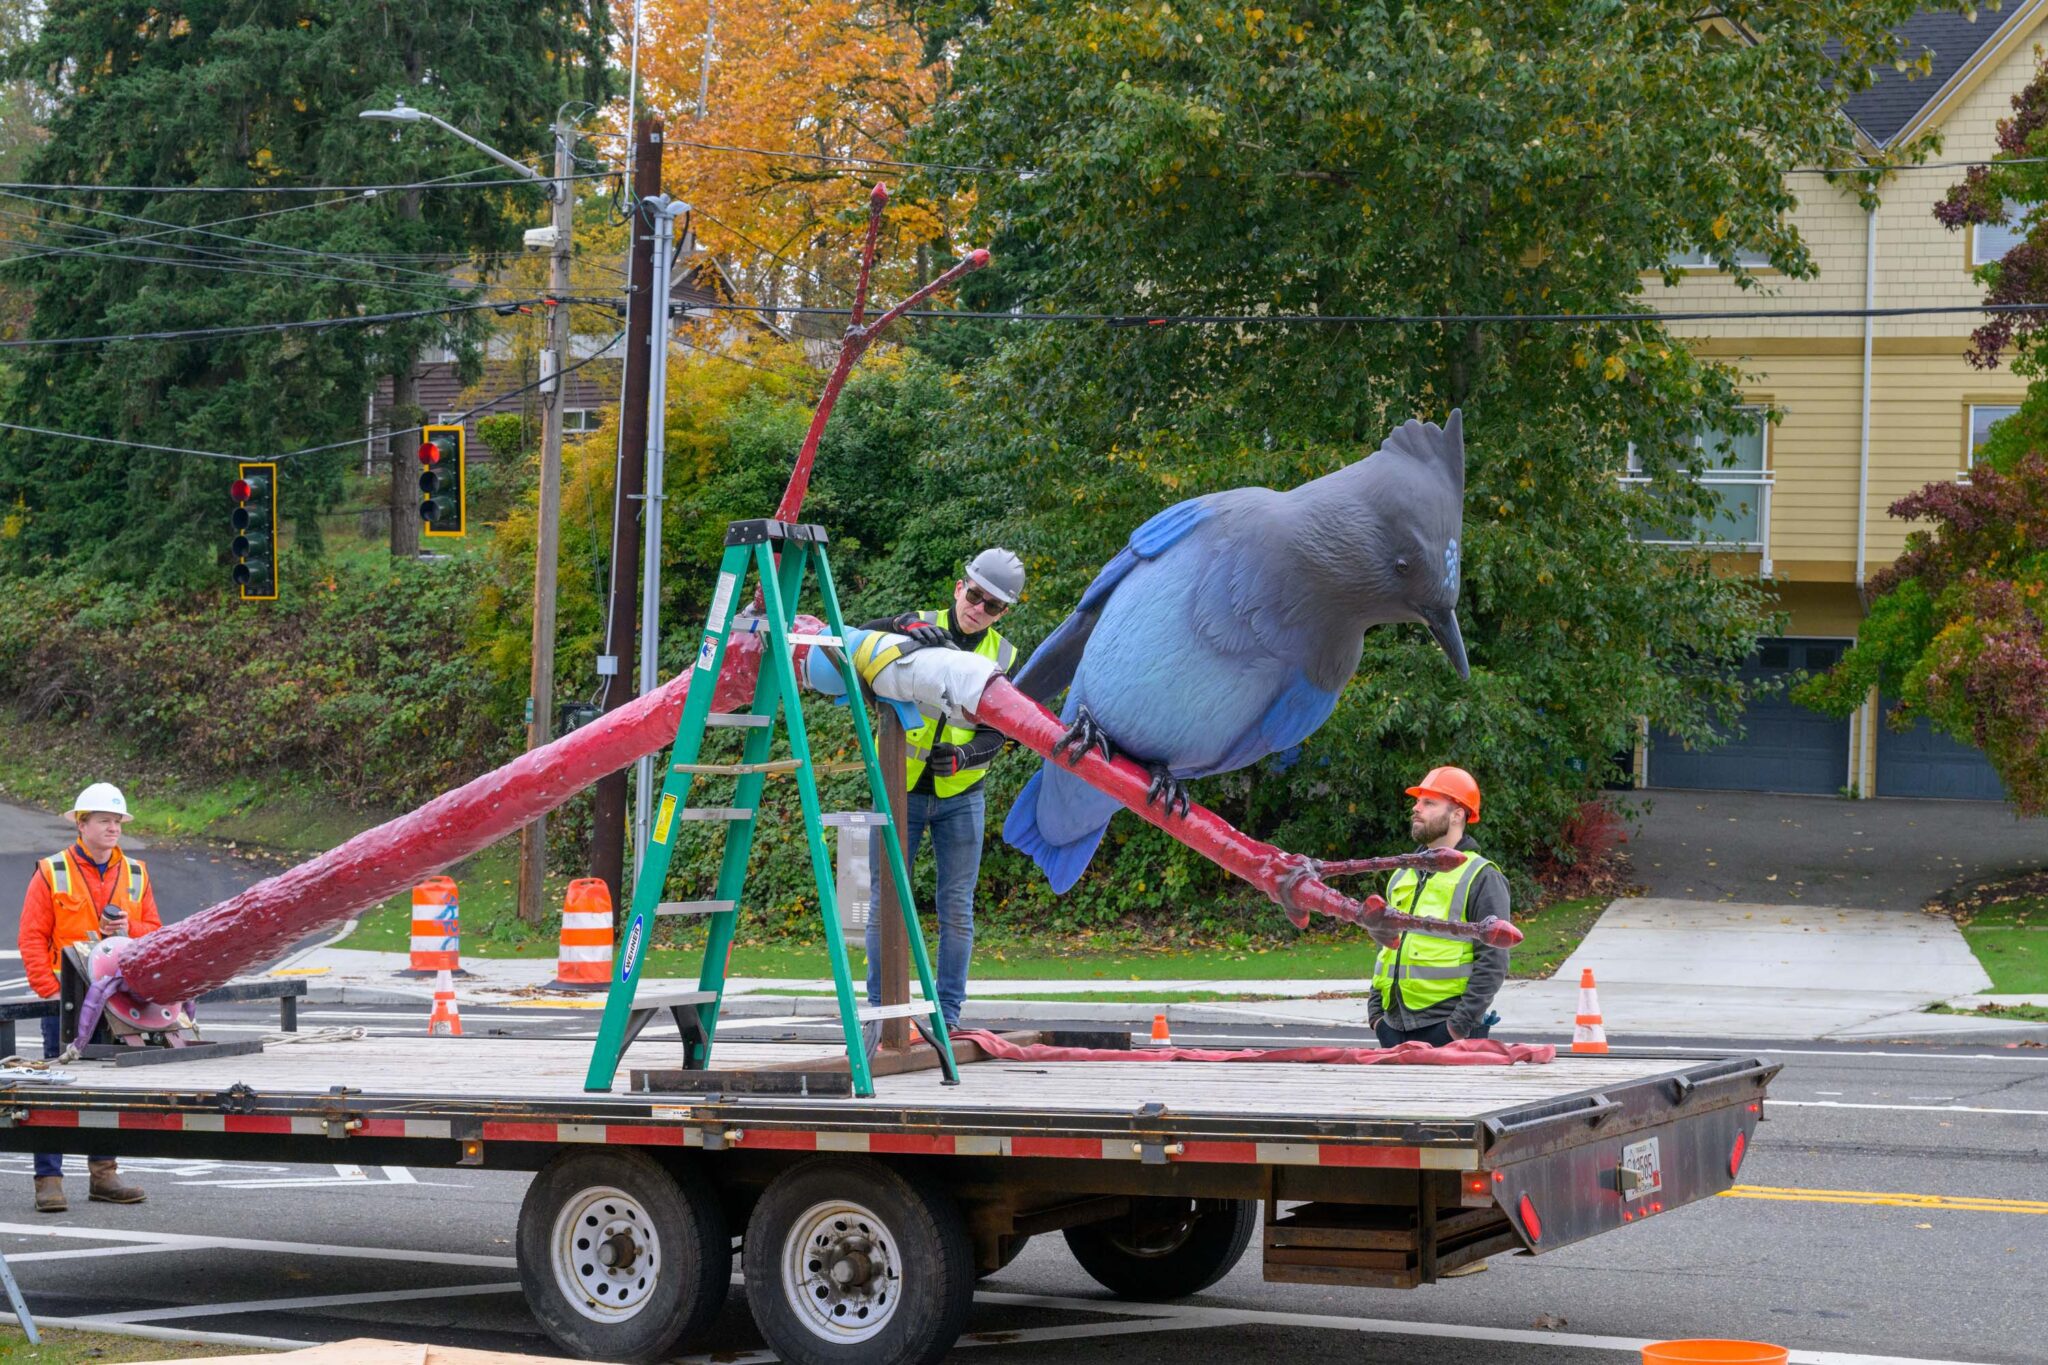 Three construction workers work to install the new piece of art, unloading it from a large flatbed truck.